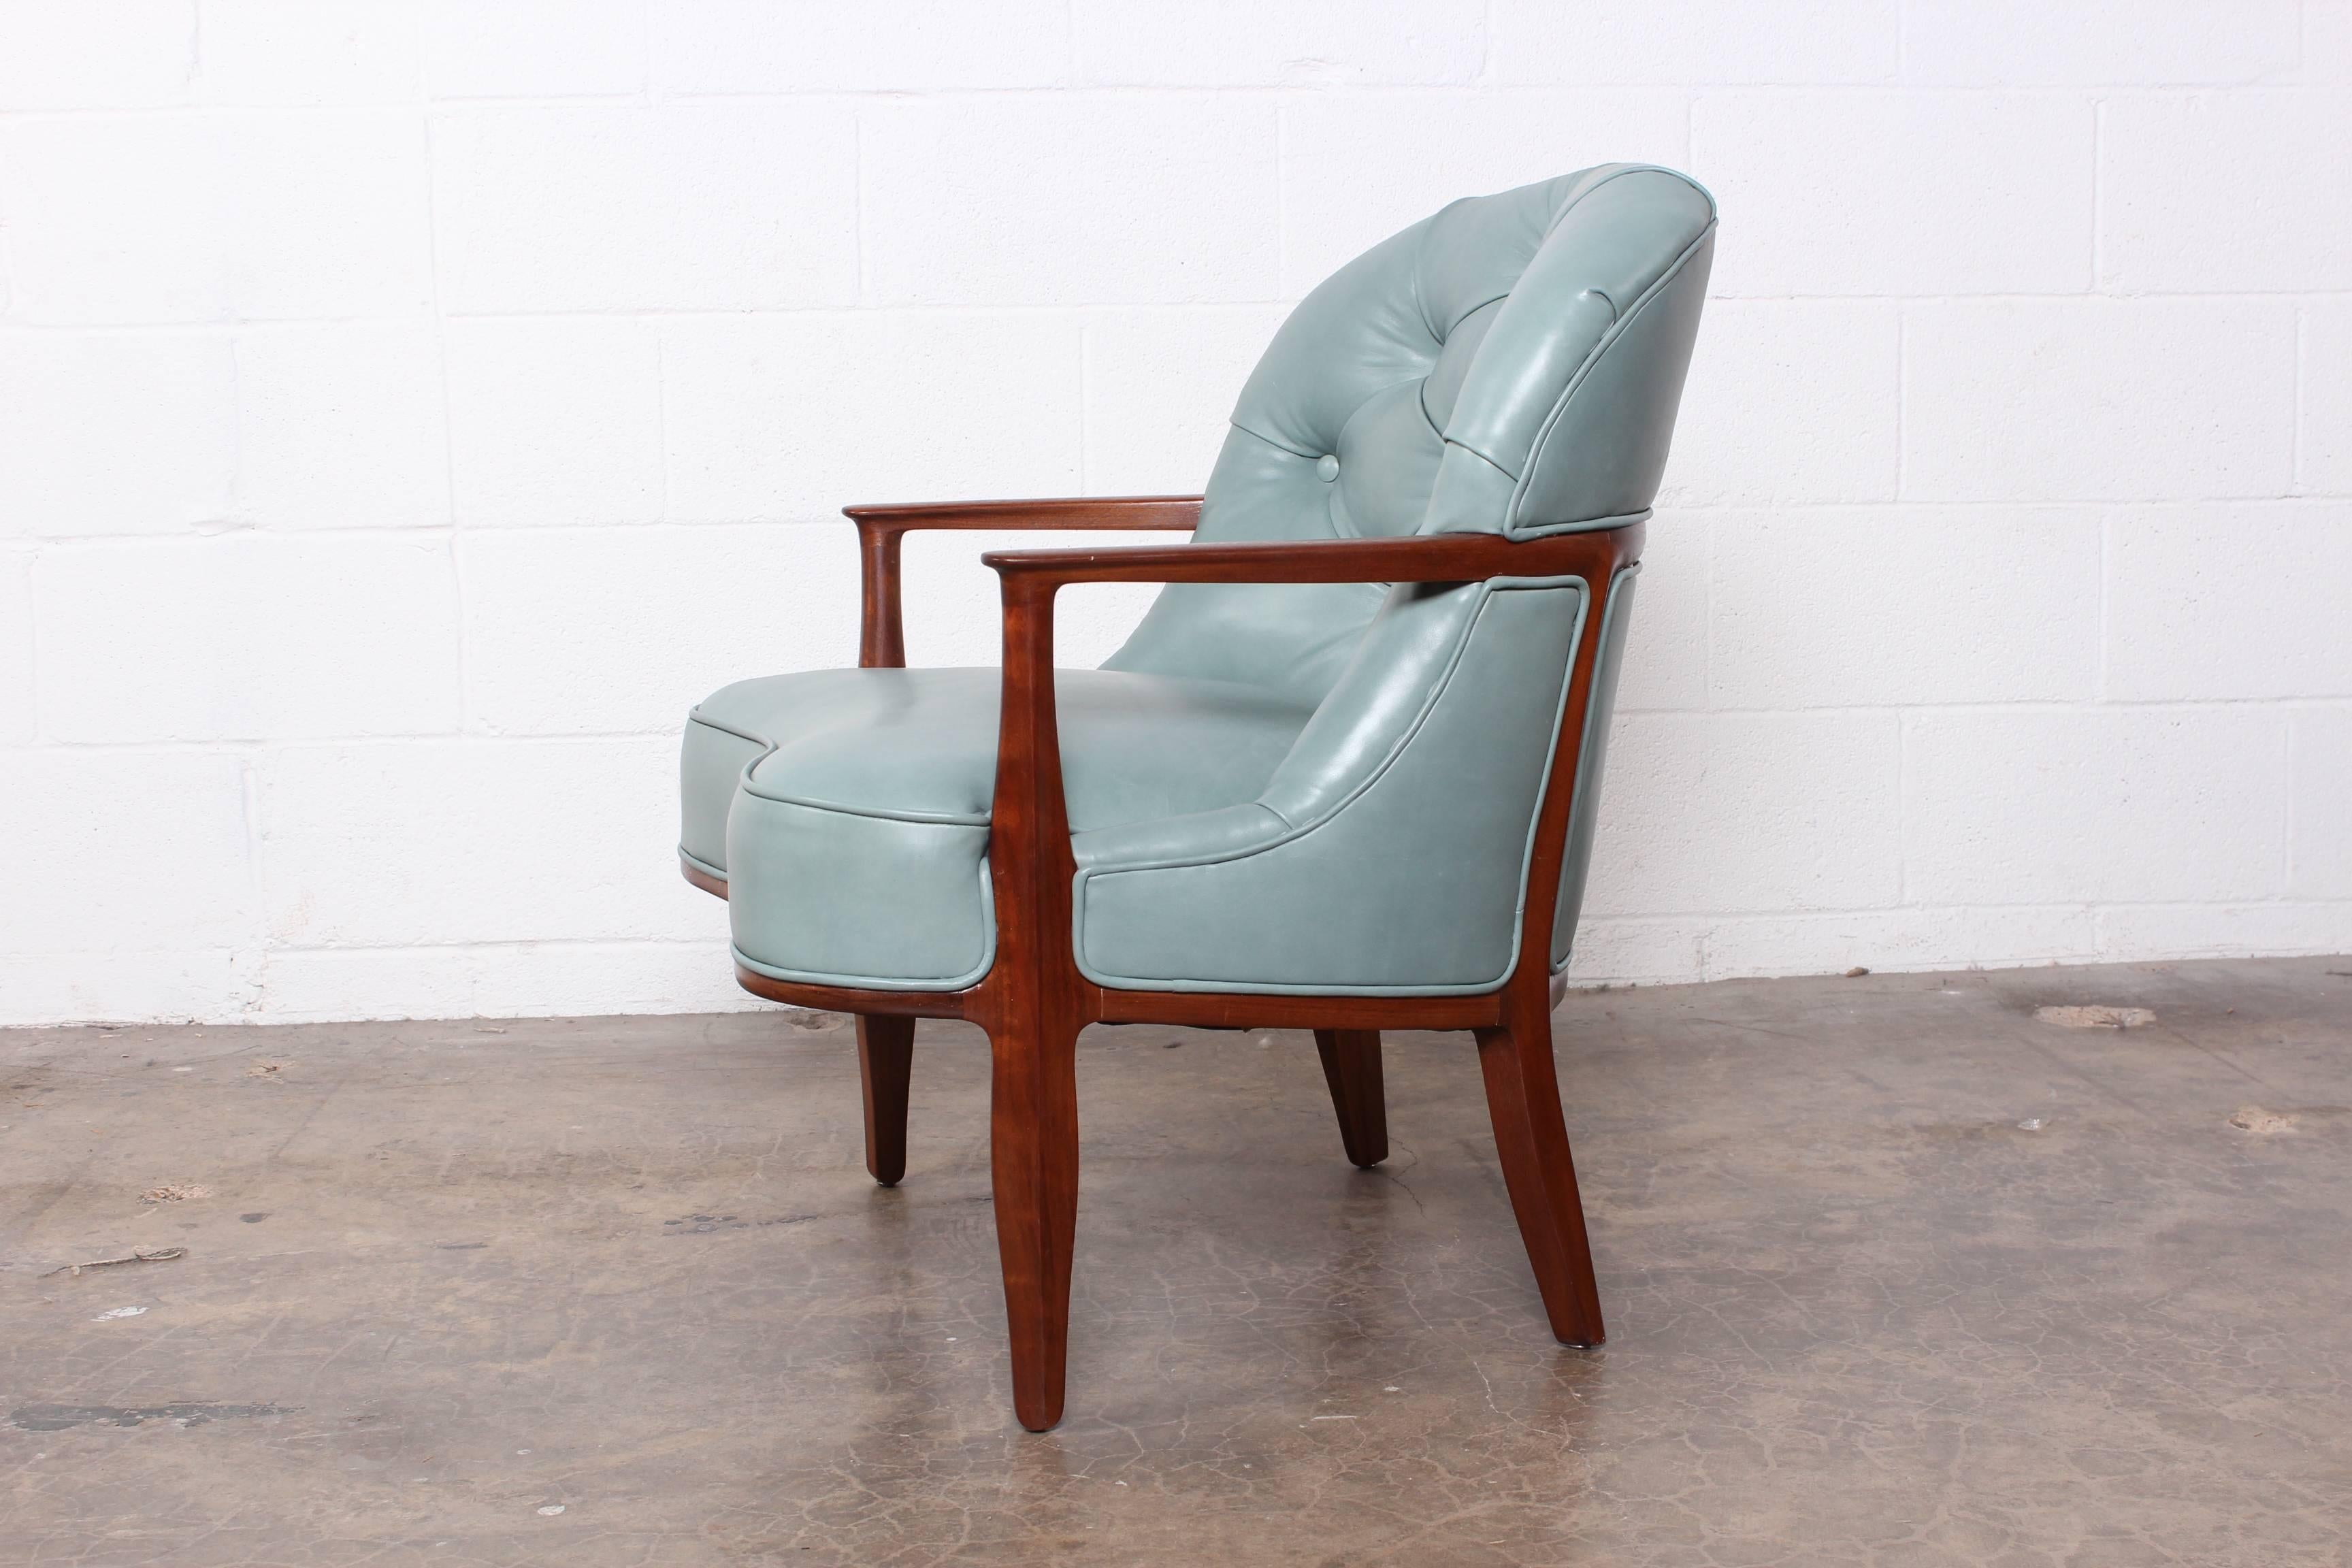 A walnut Janus lounge chair upholstered in blue leather. Designed by Edward Wormley for Dunbar.